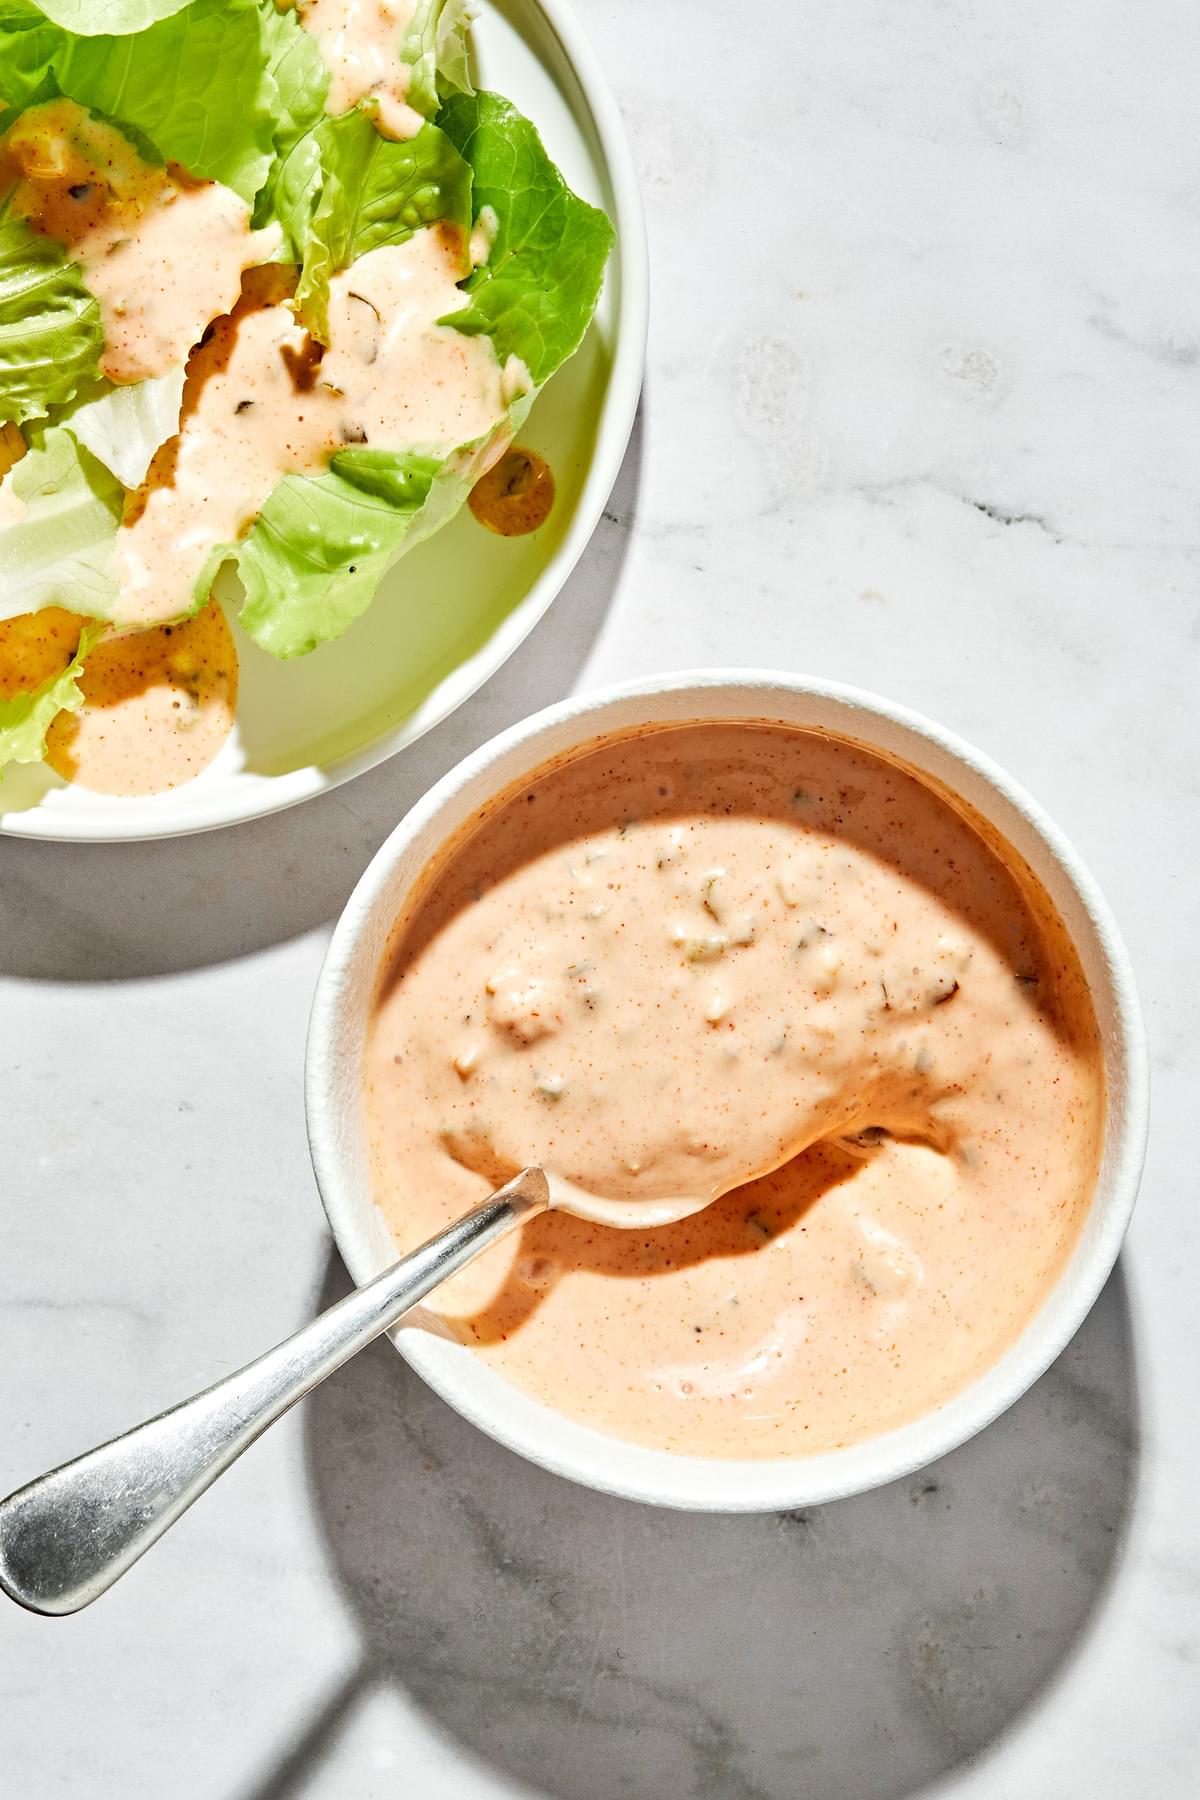 a bowl of homemade thousand island dressing being spooned over a green salad